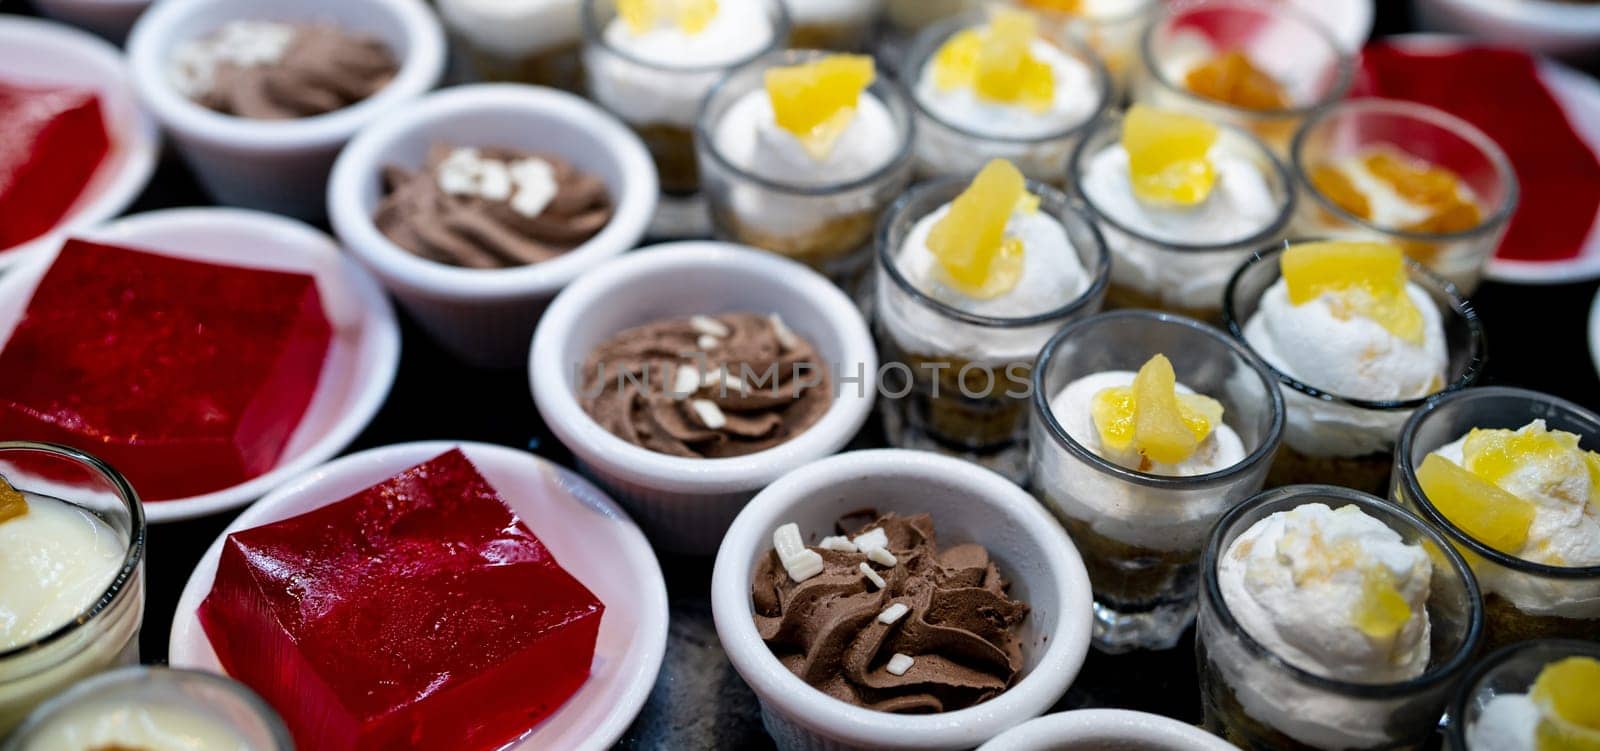 Dessert buffet catering concept. Selective focus dessert on buffet counter. Dessert in plate, cup, and glass on table at restaurant for lunch buffet. Sweet food. Red jelly agar, chocolate mousse. by Fahroni